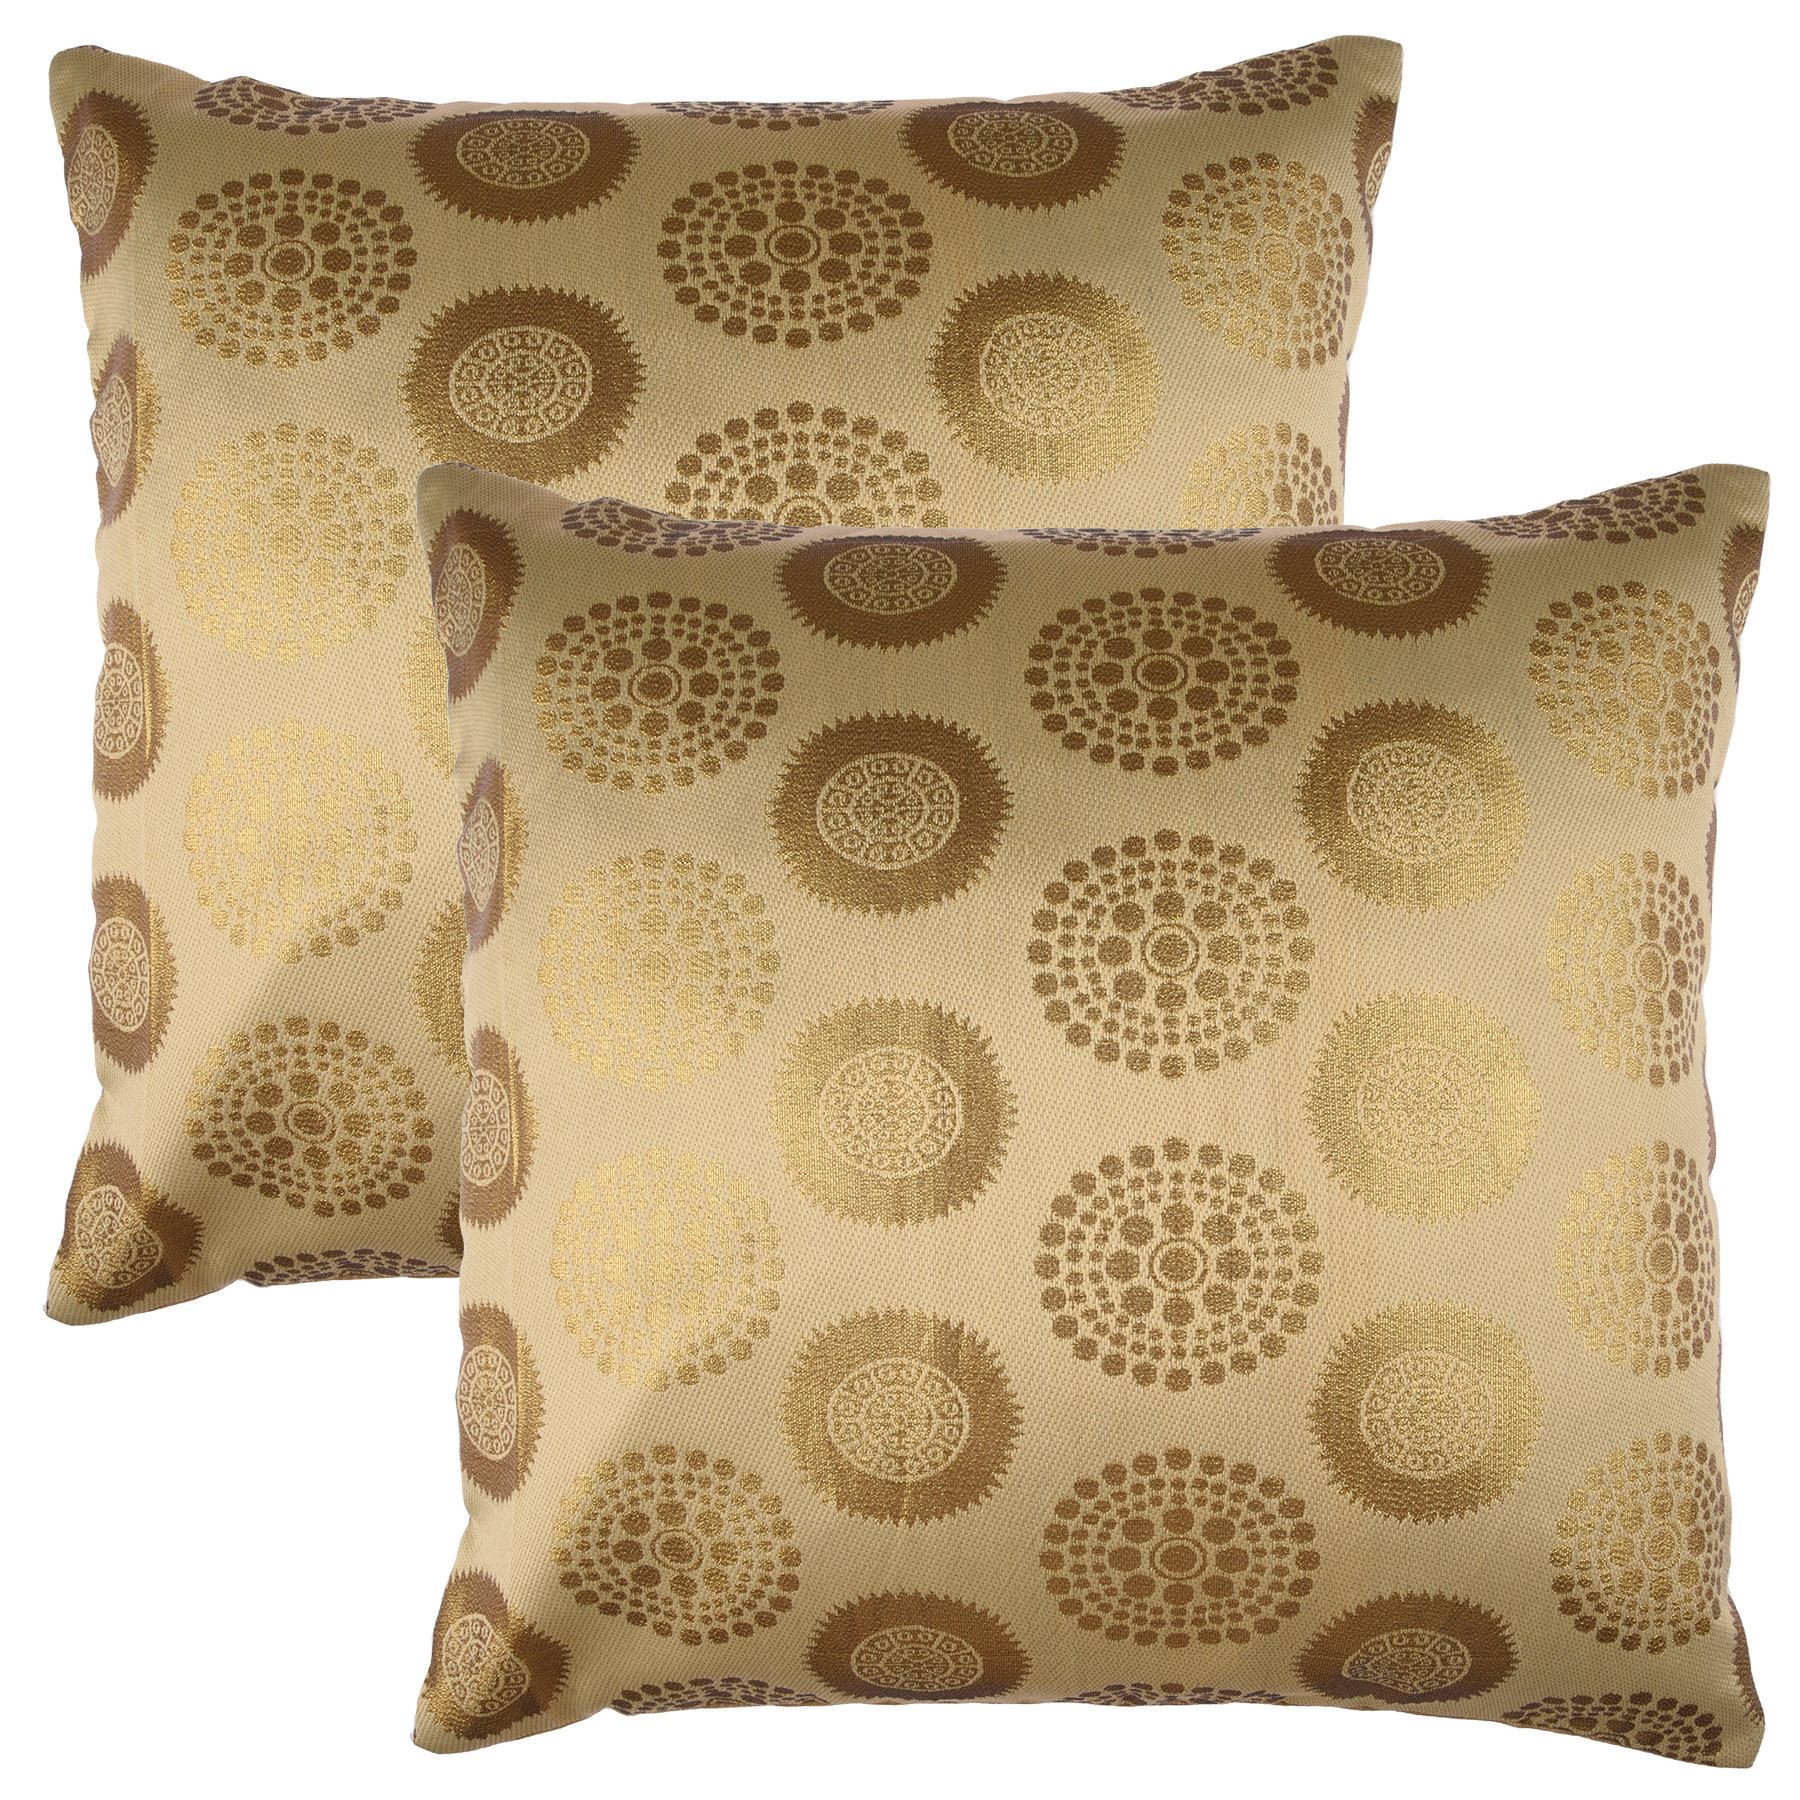 Kuber Industries Cushion Cover | Pillow Covers for Sofa | Throw Cushion Cover | Polyester Cushion Covers | Banarasi Gola Cushion Covers | Set of 5 | 12 Inch | Golden